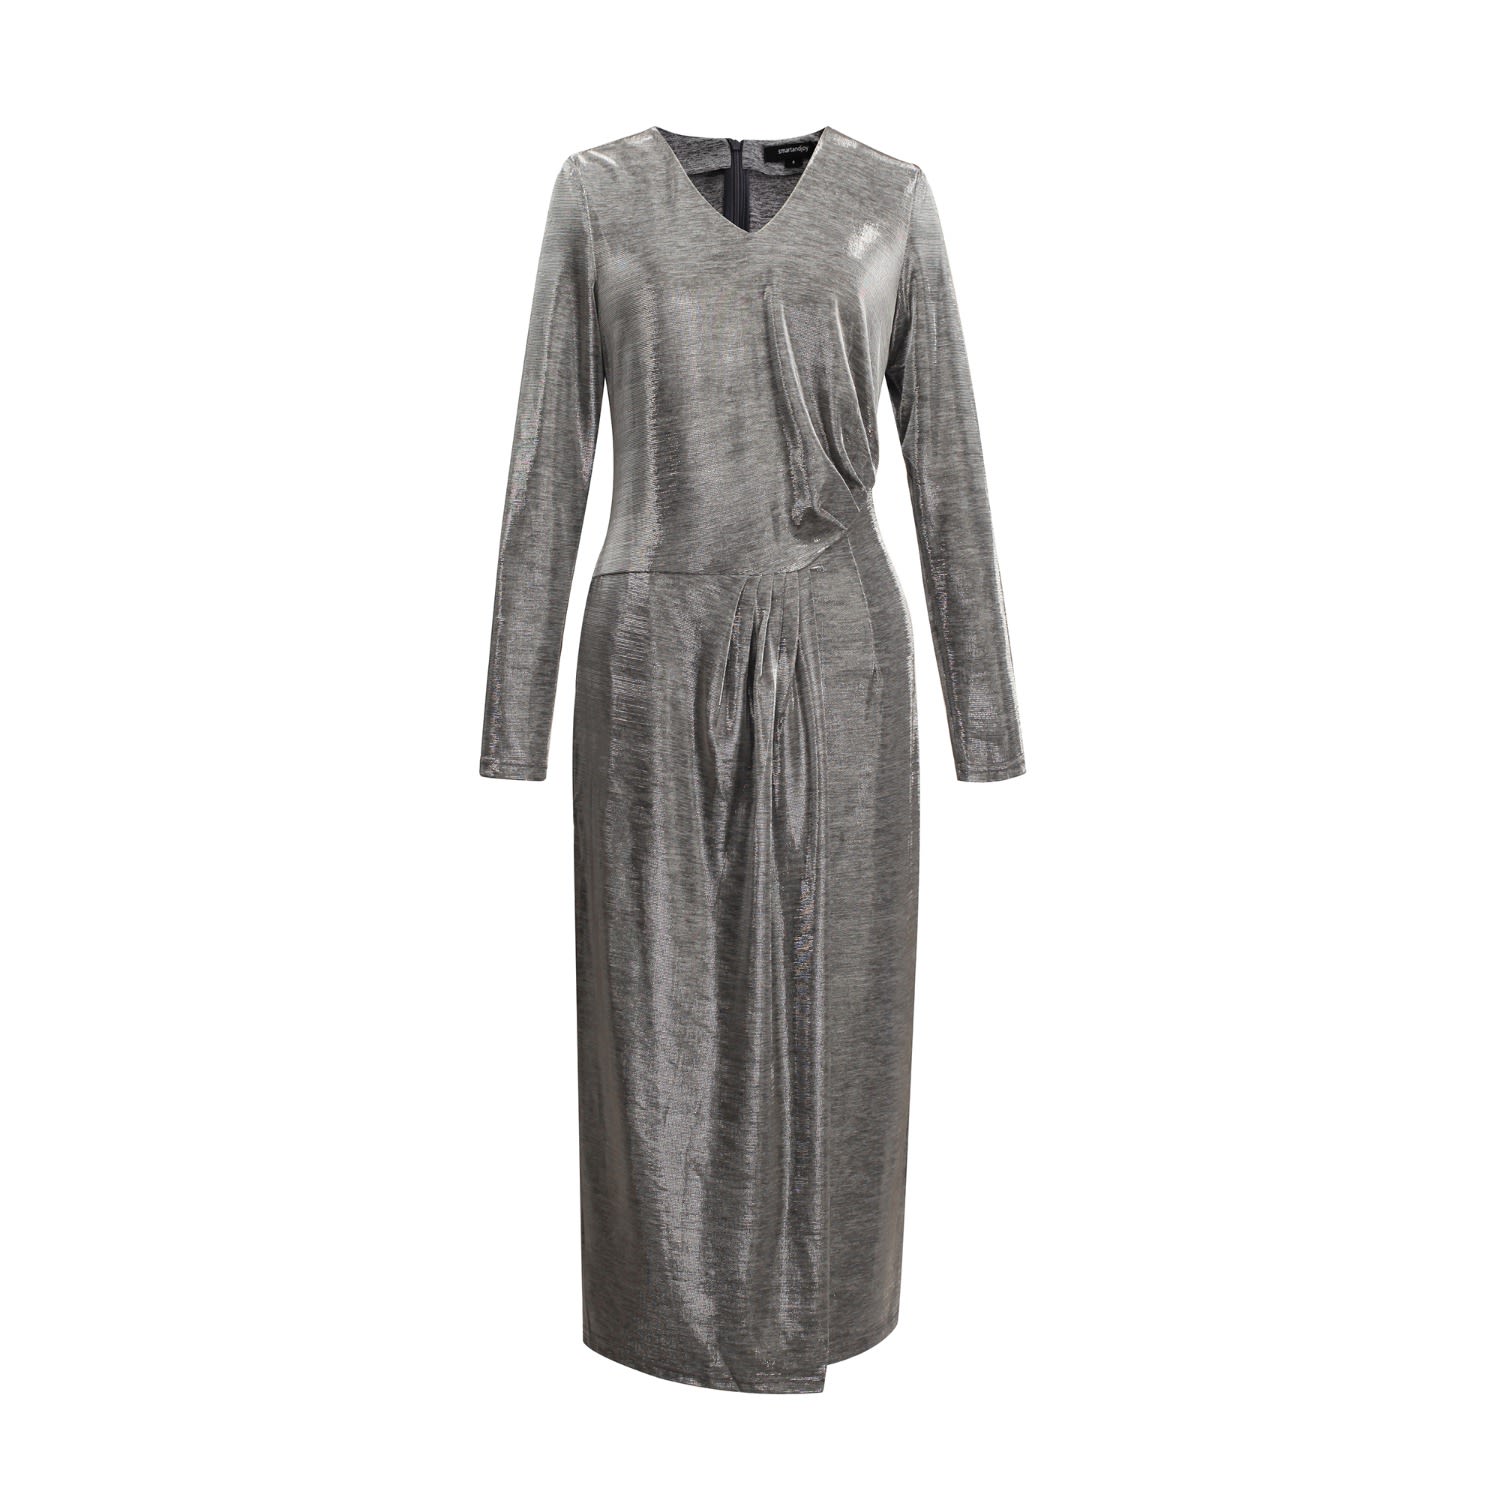 Women’s Grey Asymmetric Rushed Effect Shiny Cocktail Dress Extra Small Smart and Joy